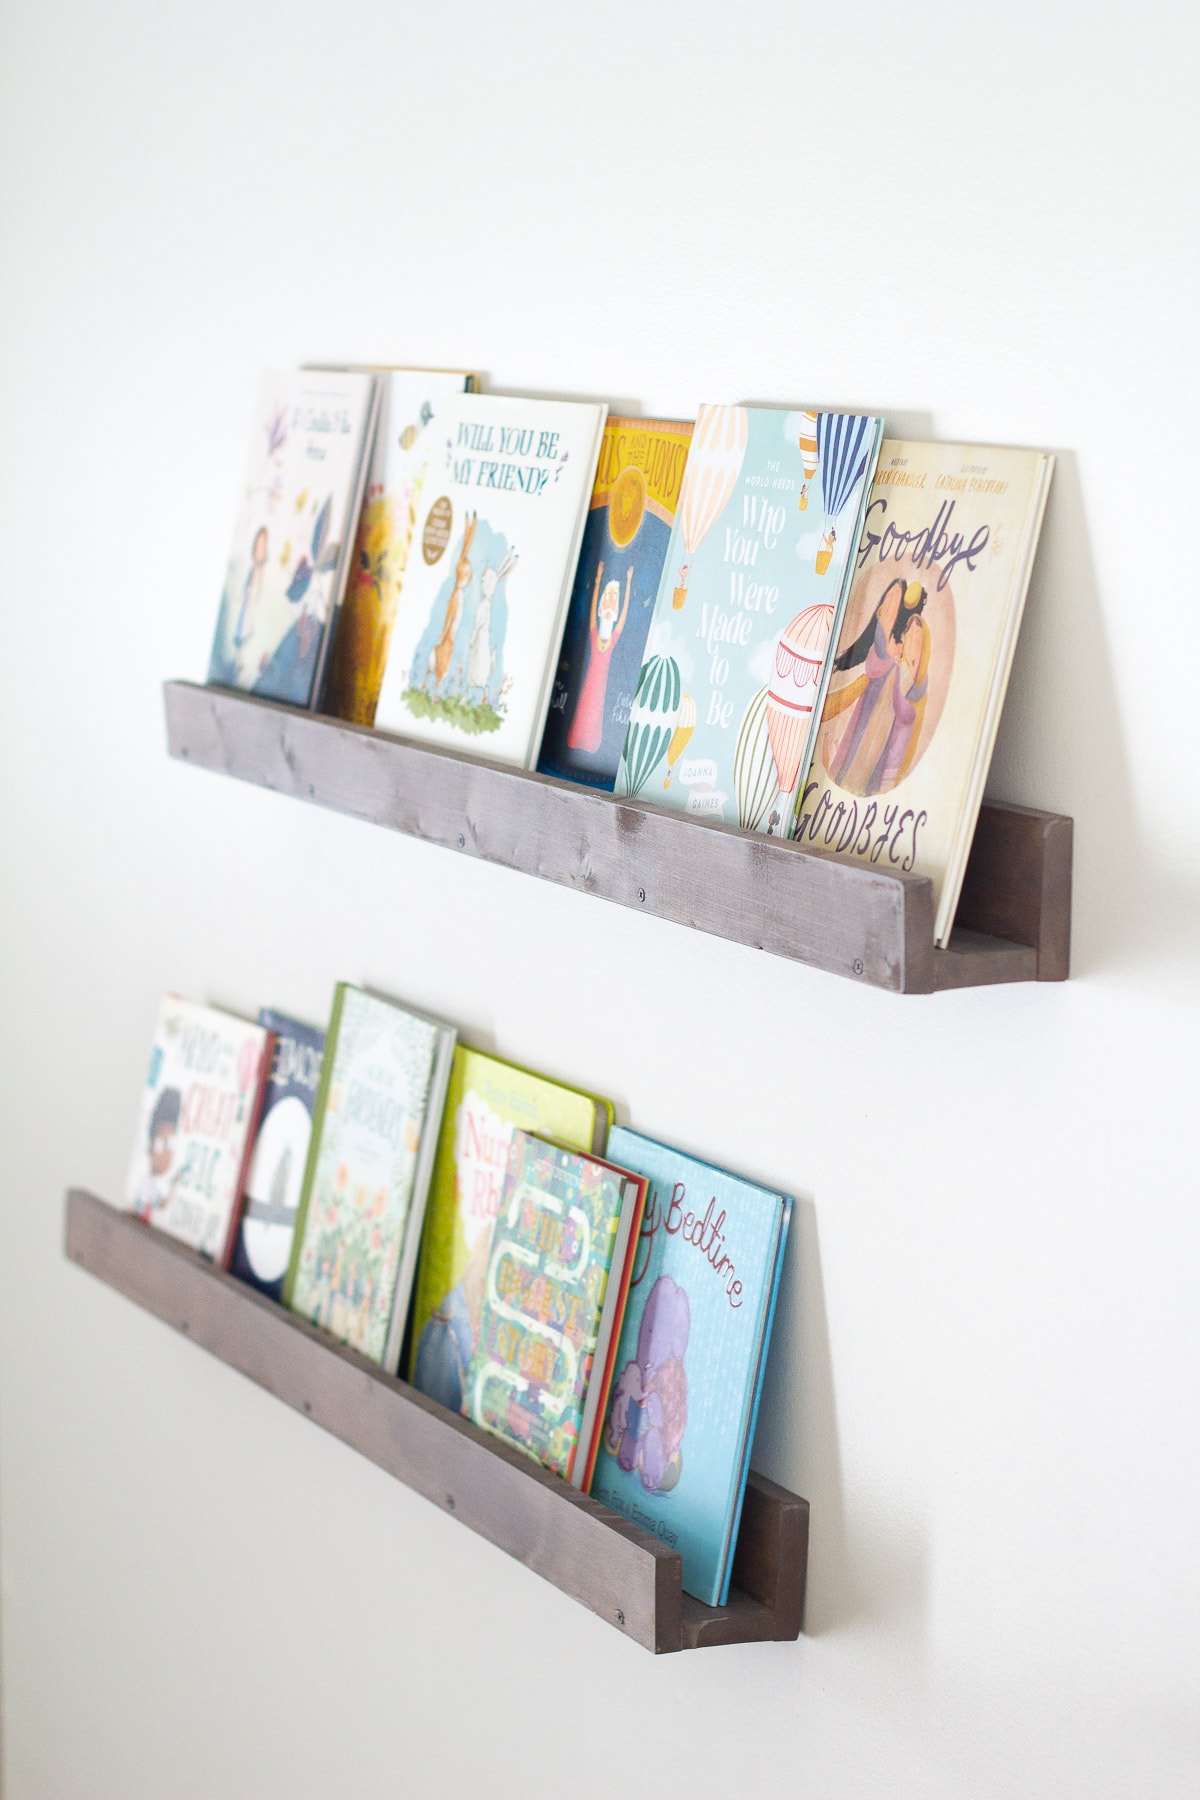 How to store kids books on wooden floating wall shelves.